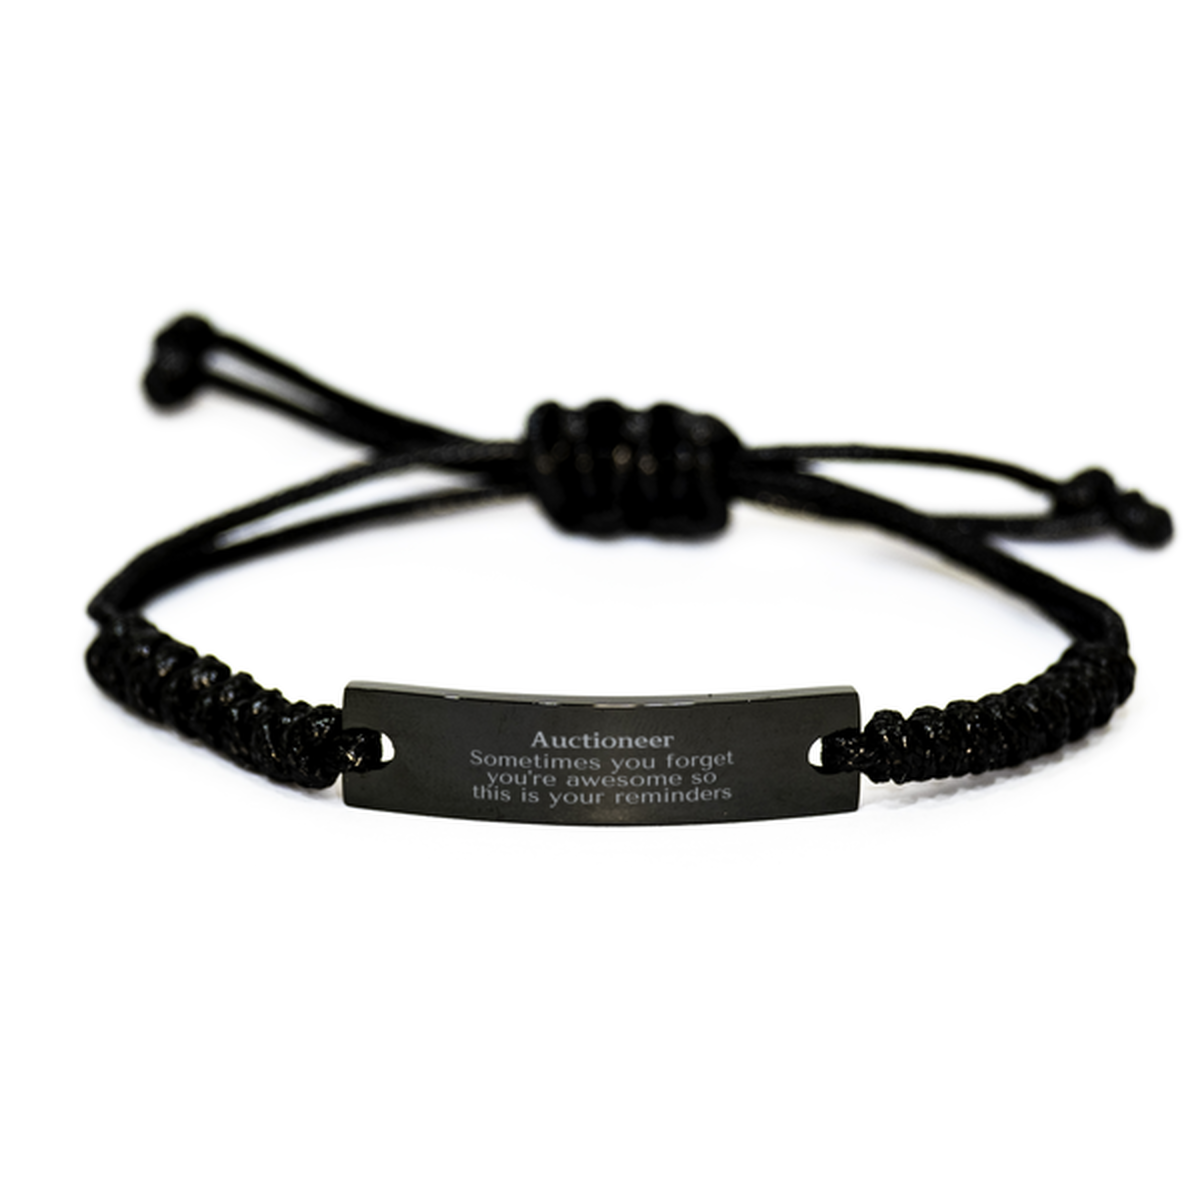 Sentimental Auctioneer Black Rope Bracelet, Auctioneer Sometimes you forget you're awesome so this is your reminders, Graduation Christmas Birthday Gifts for Auctioneer, Men, Women, Coworkers